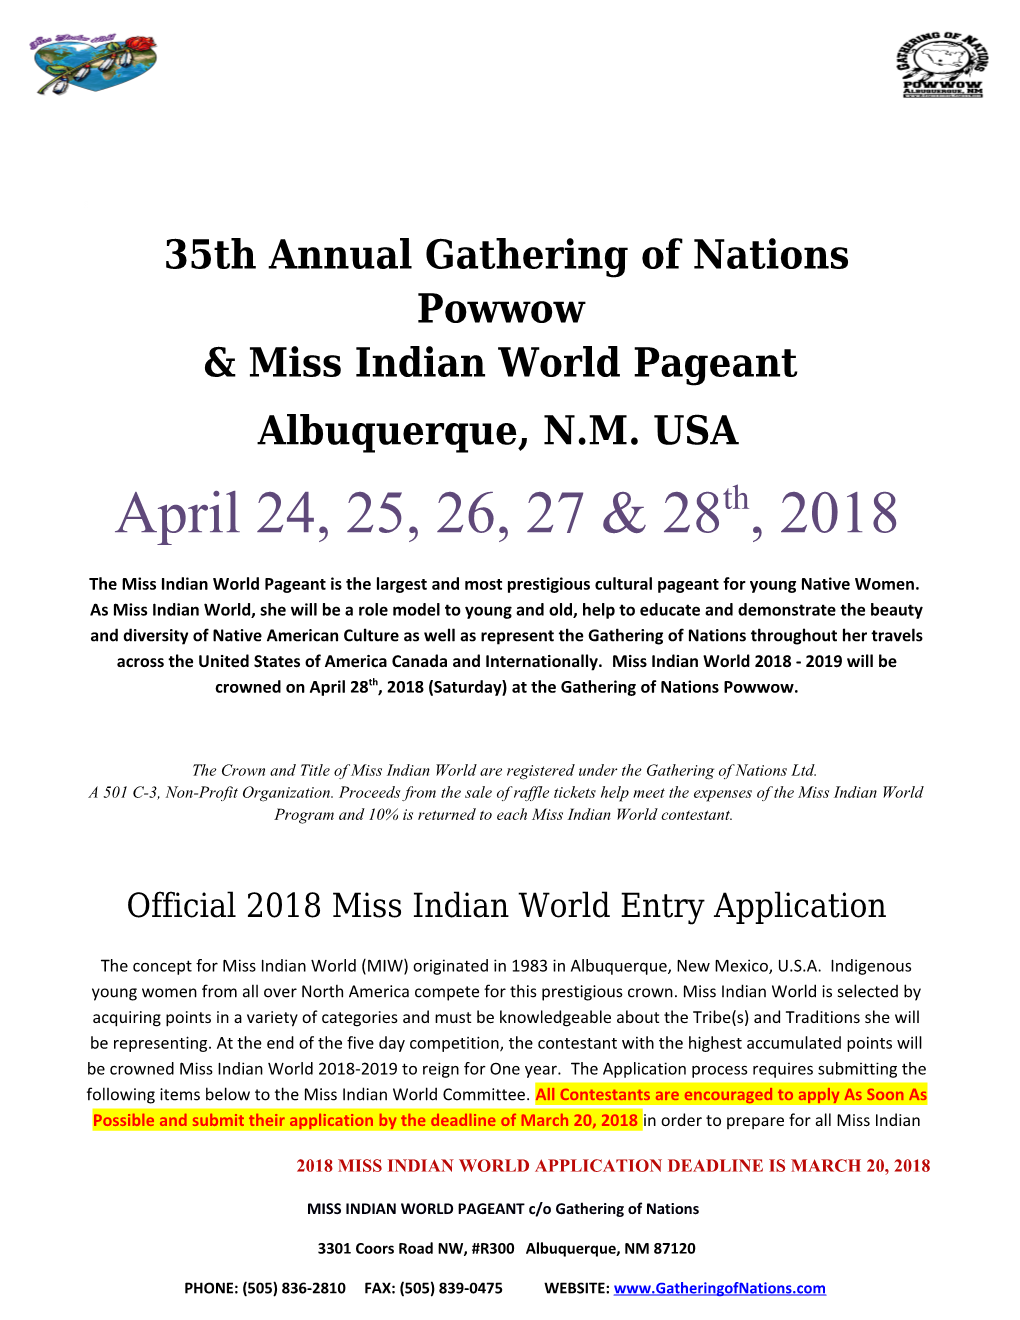 If You Have Any Questions Please Email the Miss Indian World Committee at